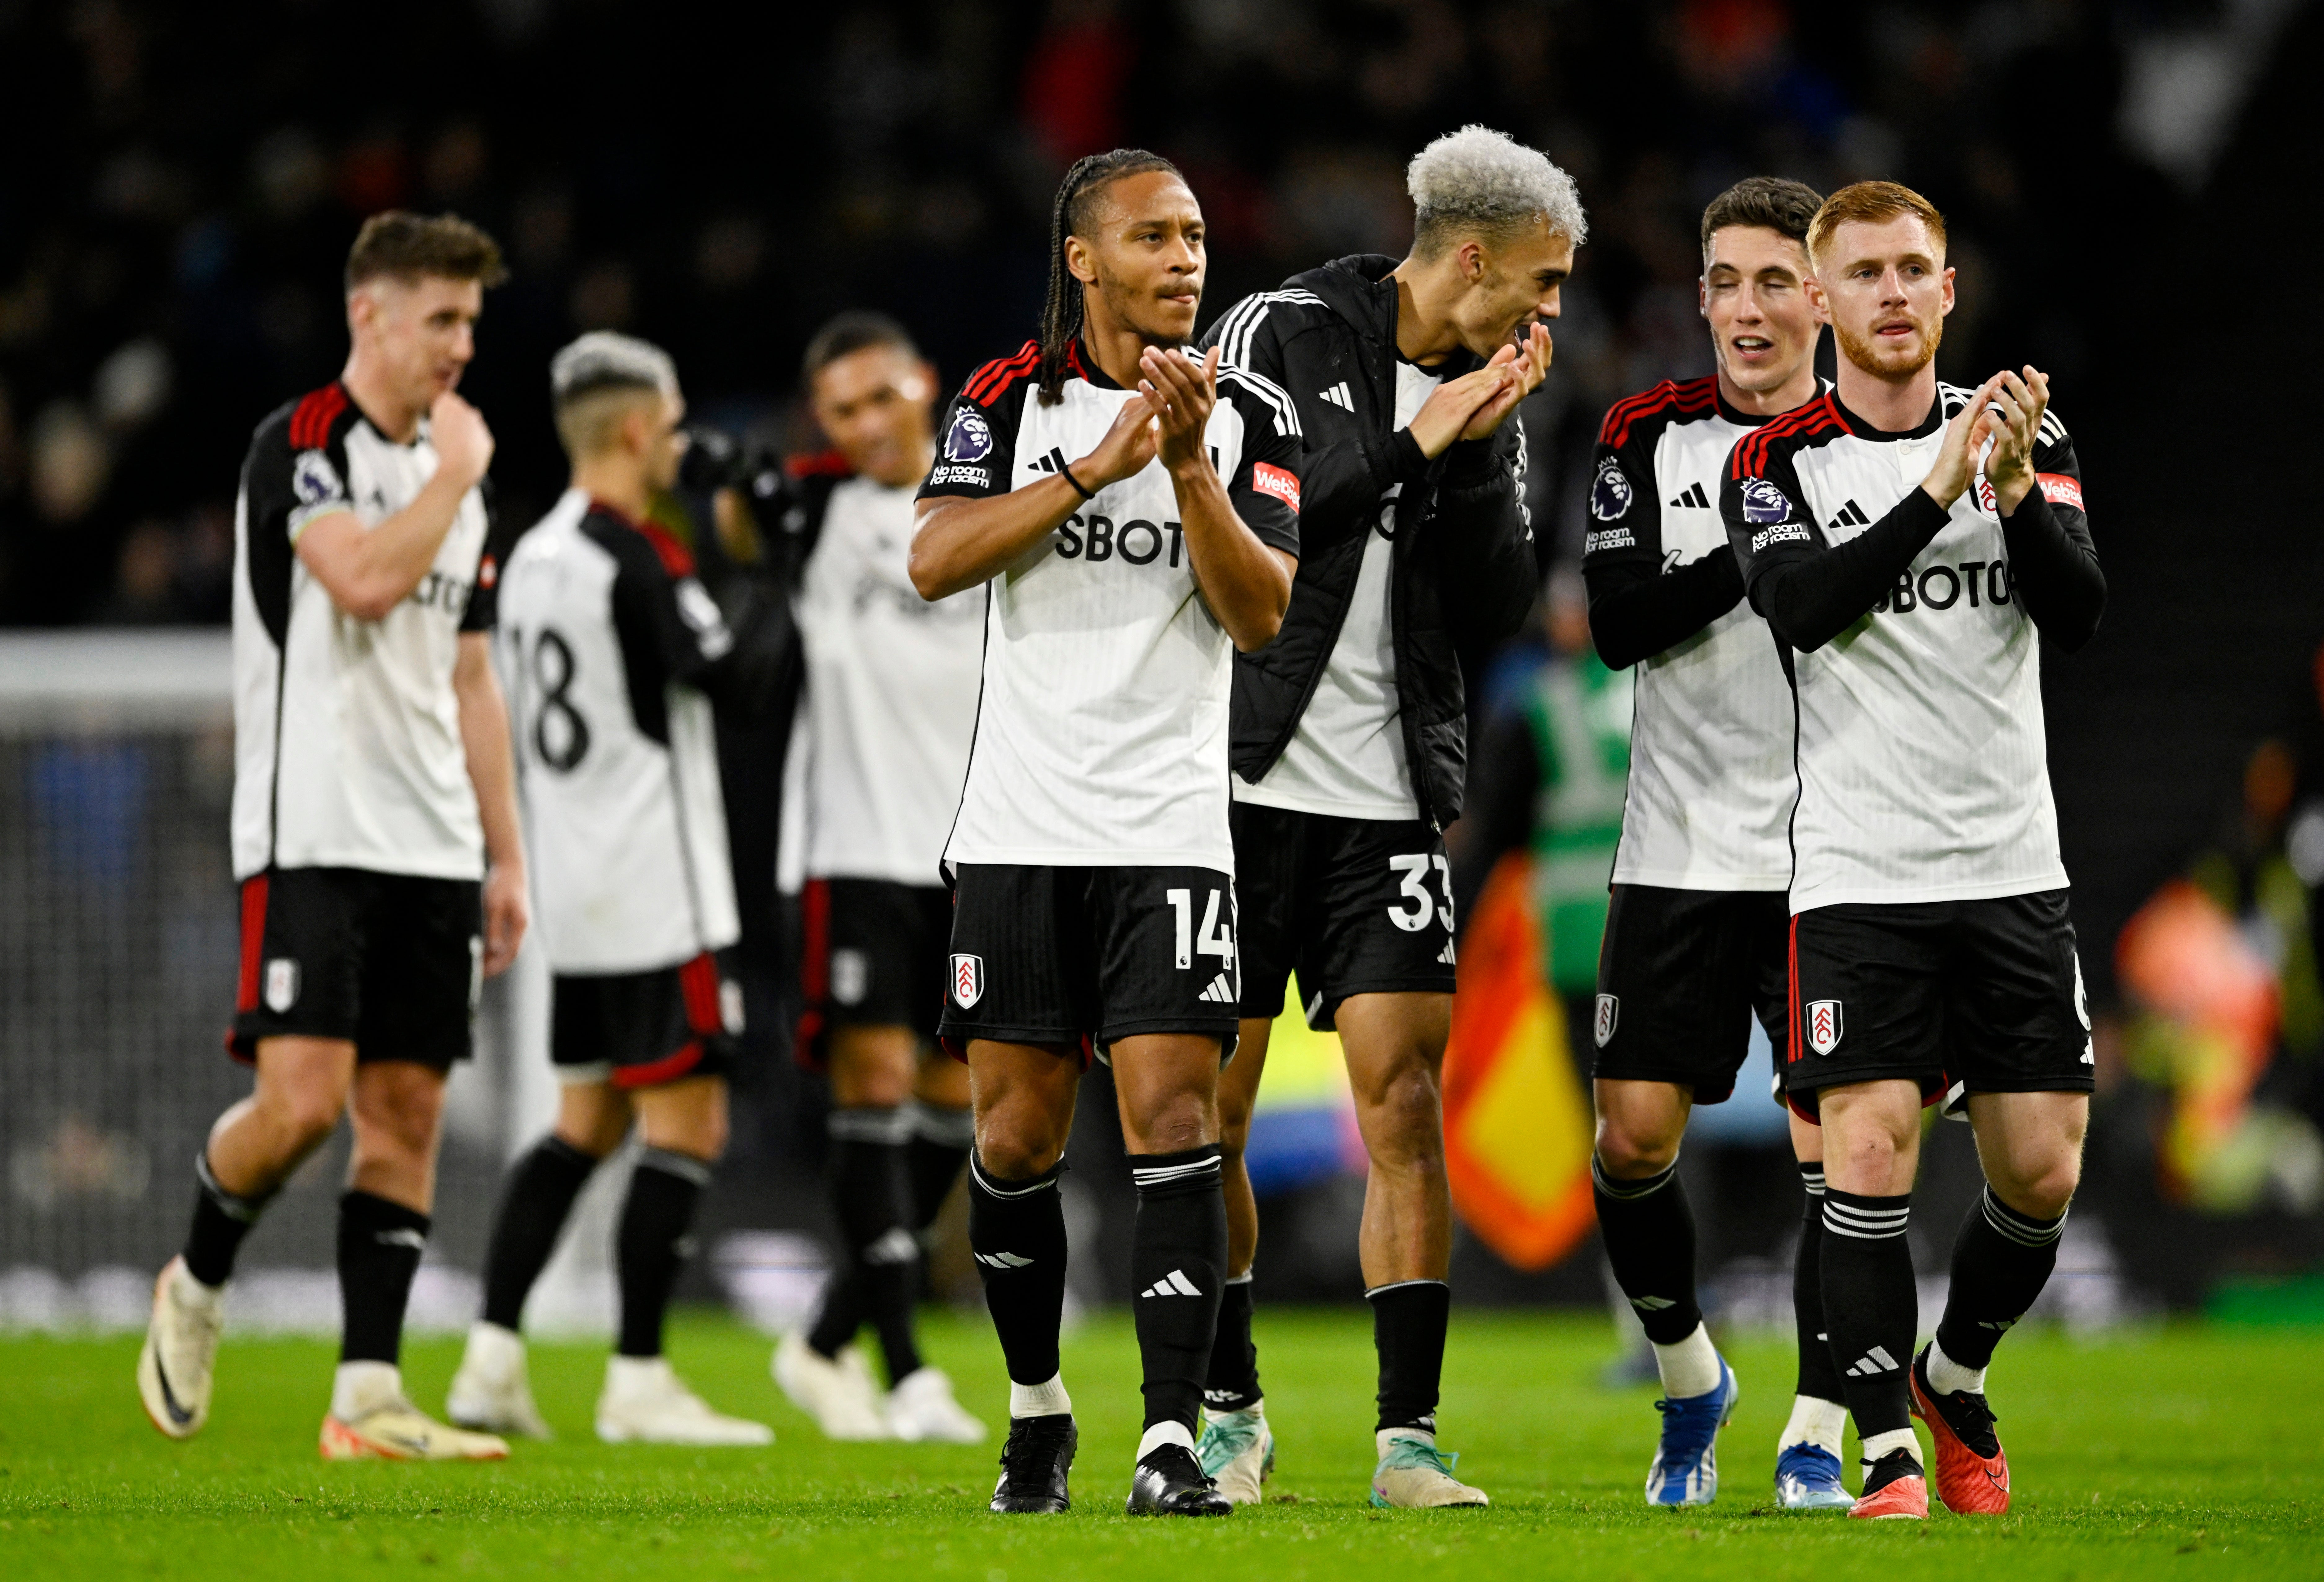 Fulham win 5-0 for 2nd time in 5 days after thrashing West Ham